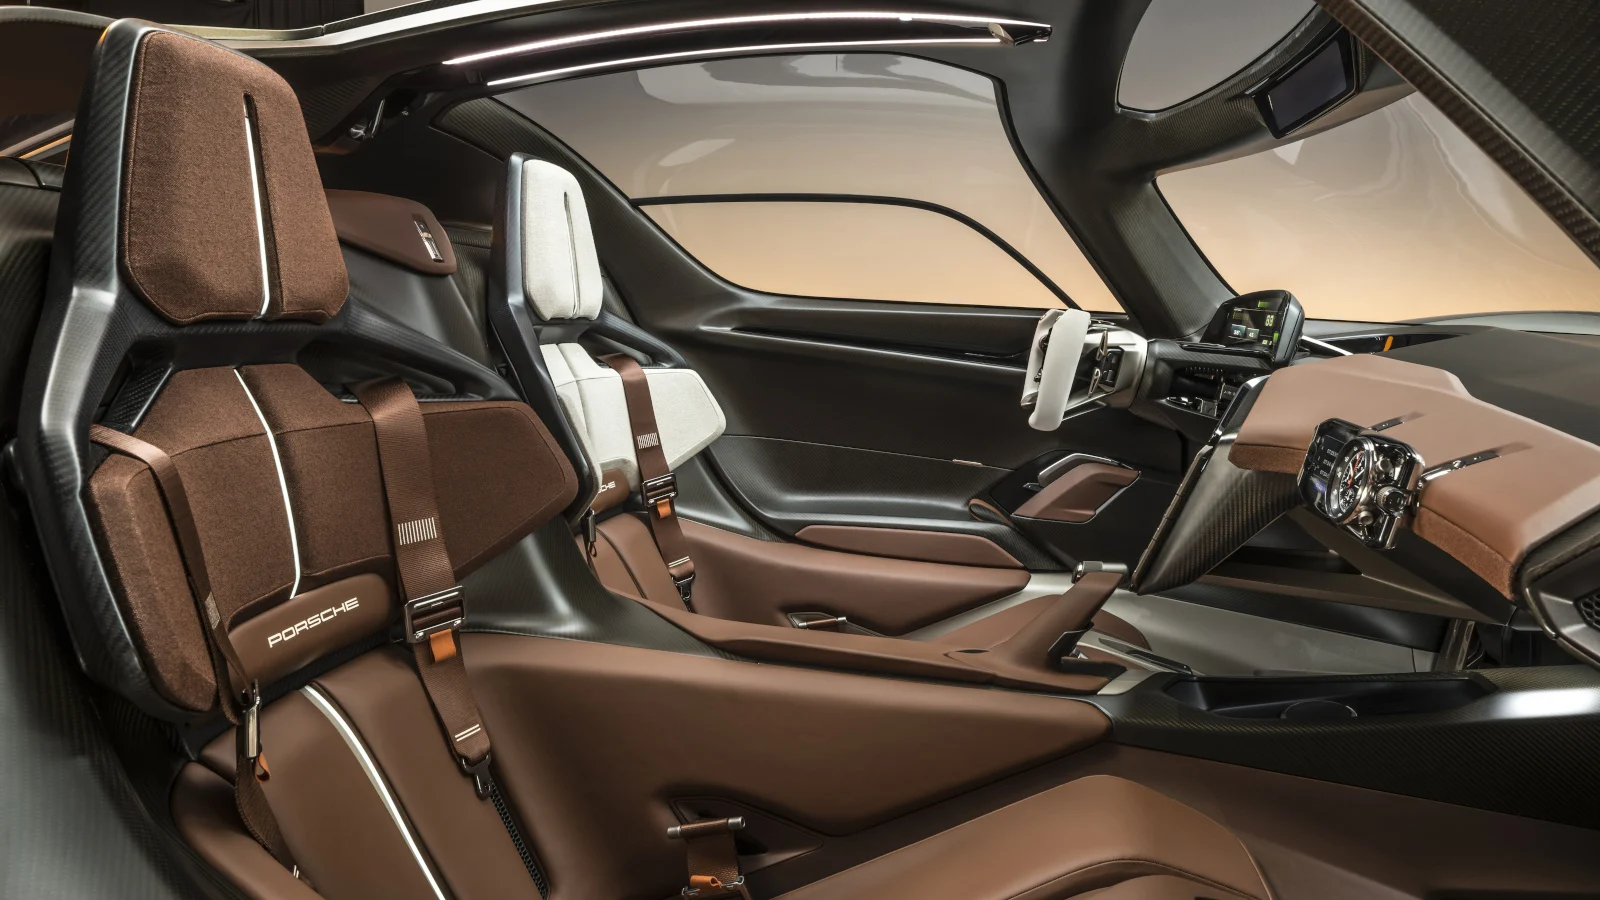 The interior of the Porsche Mission X concept showing its brown leather seats, open-top steering wheel and large windows.